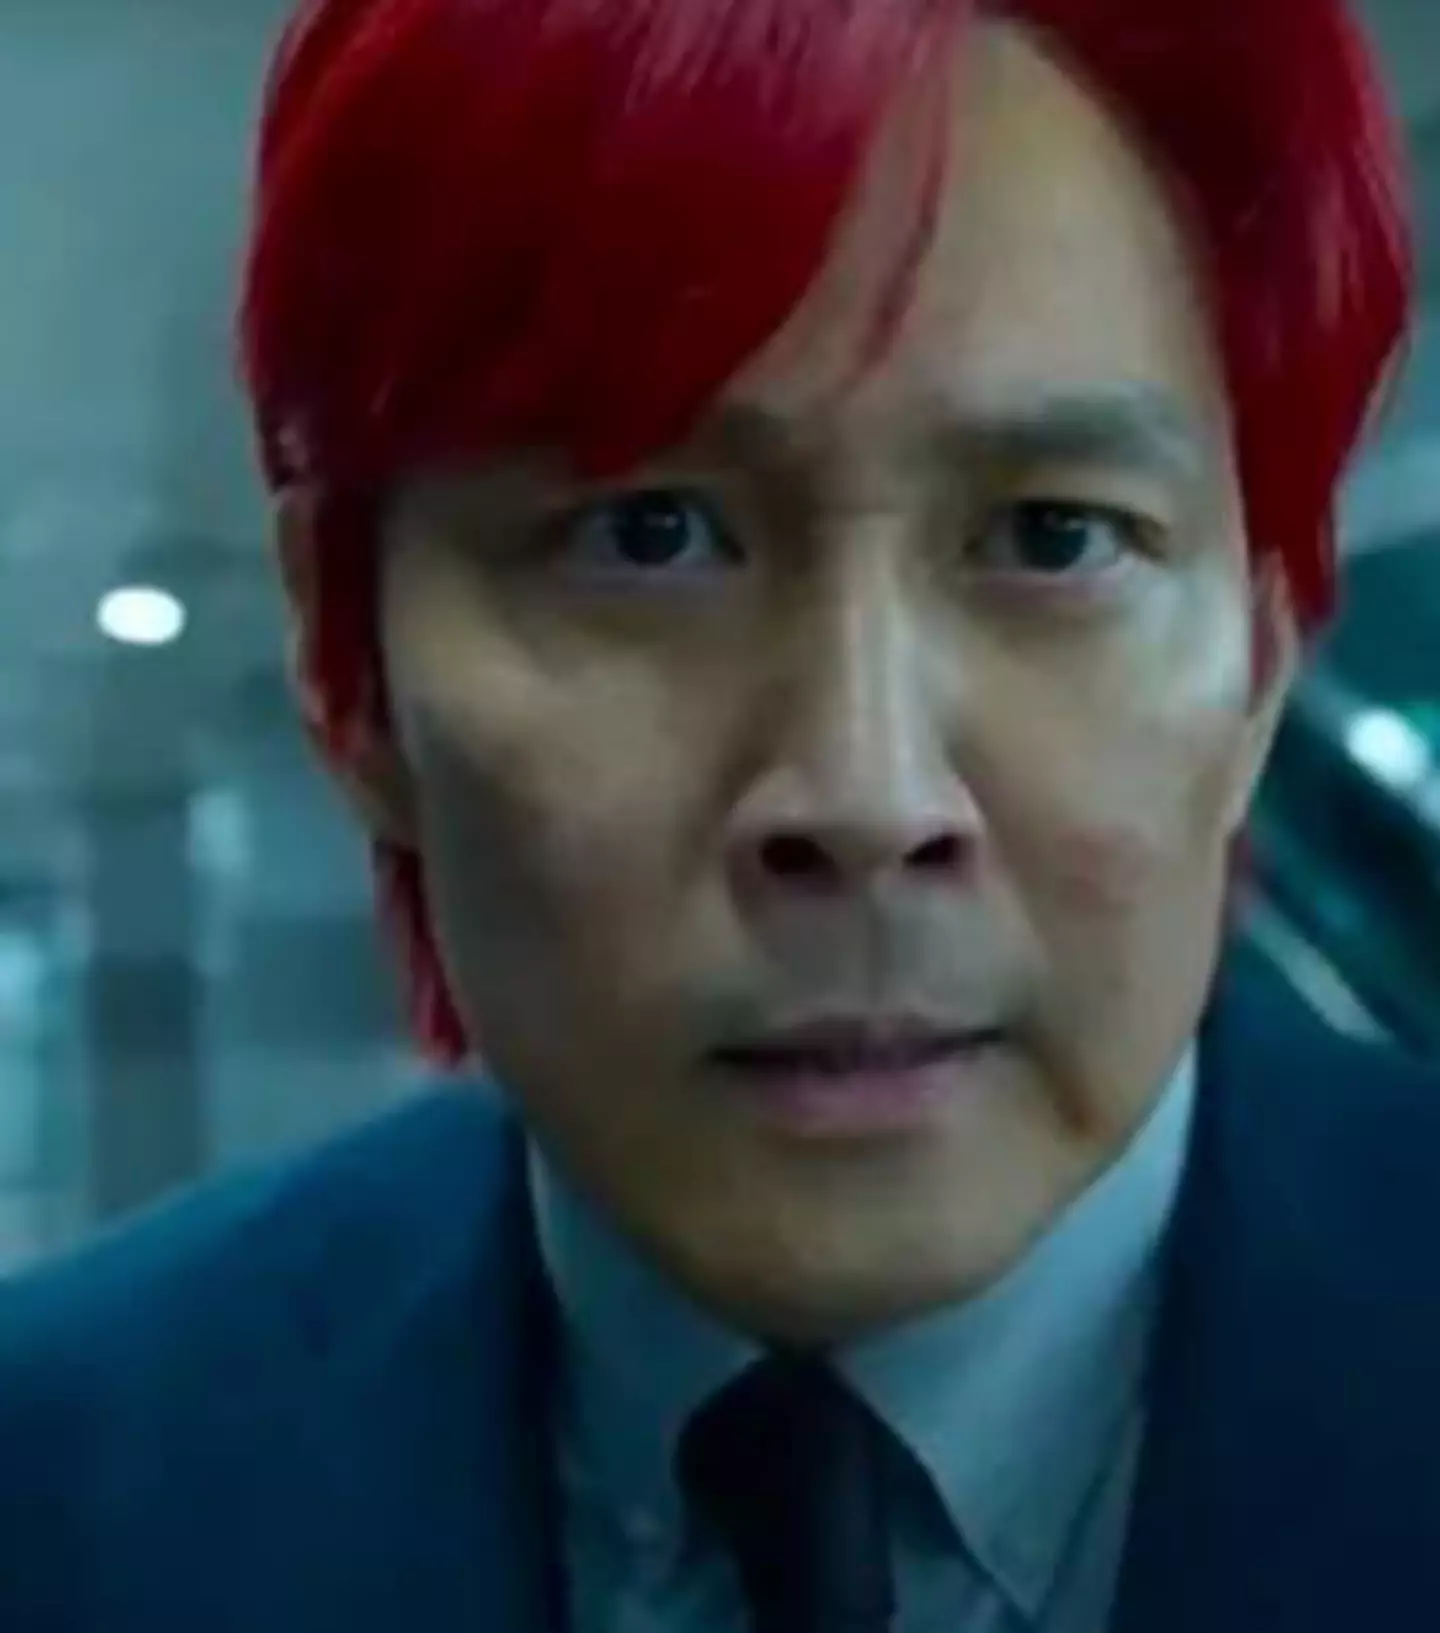 Viewers were left confused after Seong Gi-Hun dyed his hair red.